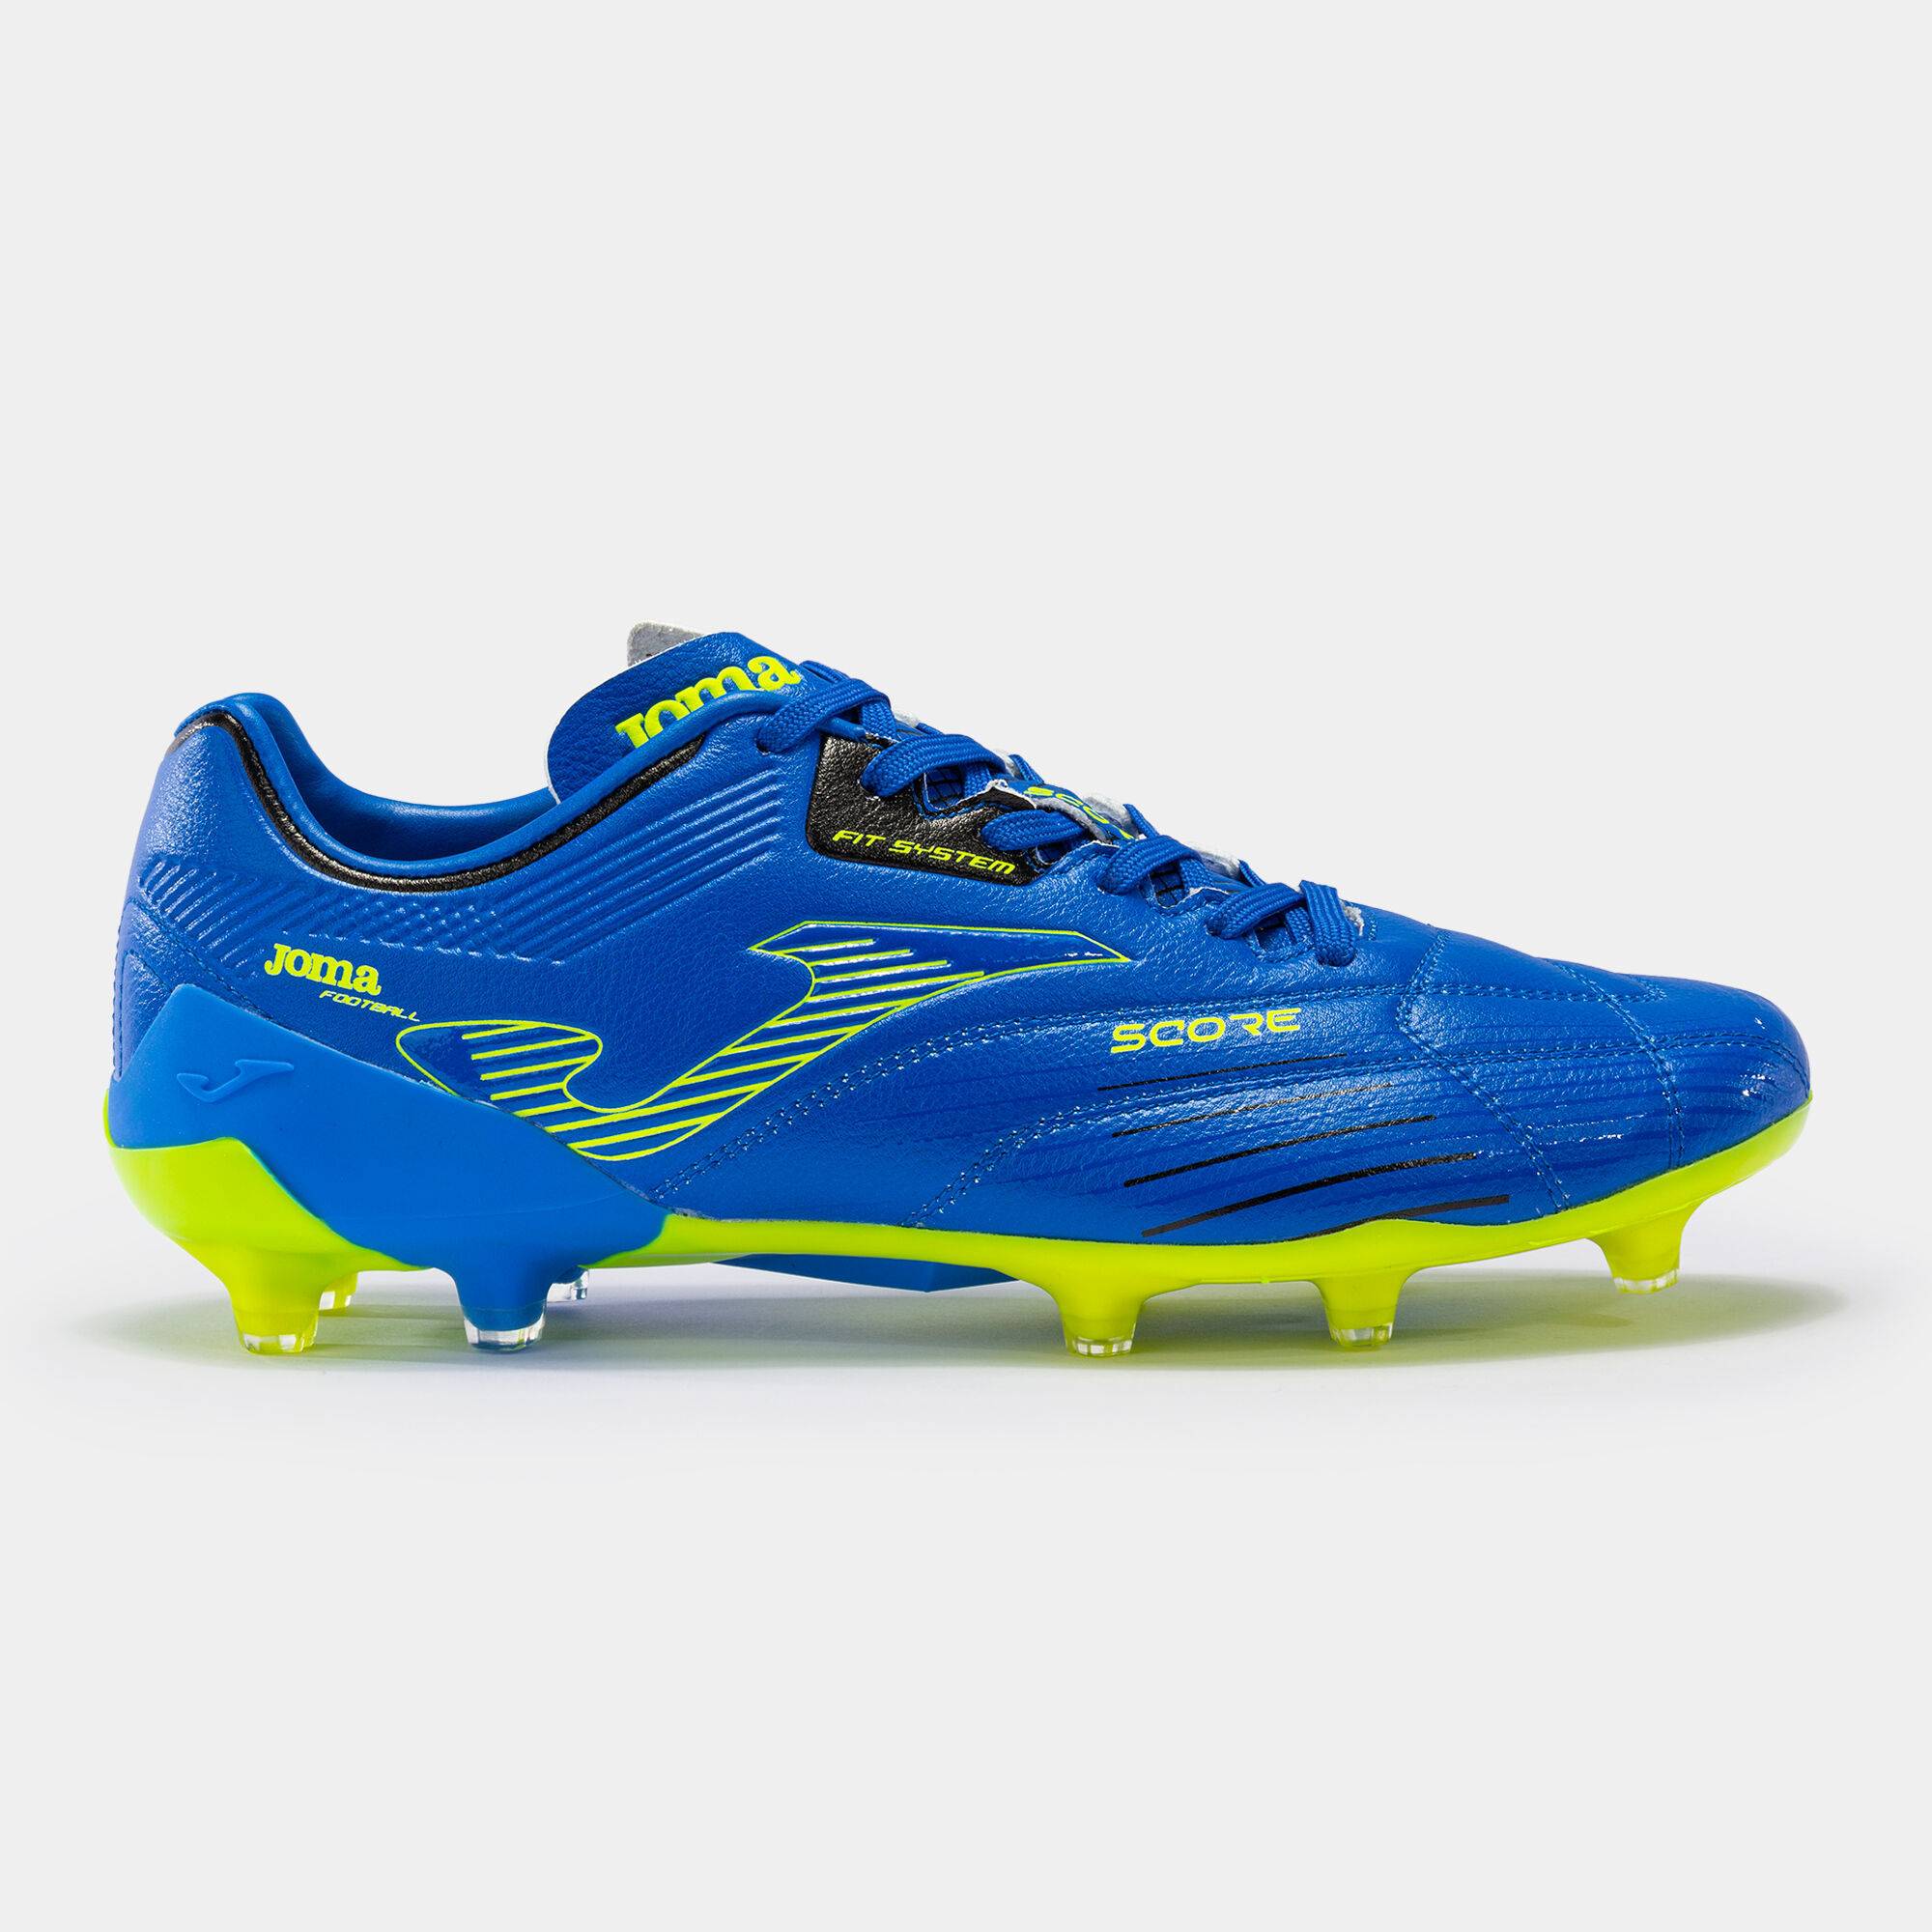 Football boots Score 23 firm ground FG royal blue